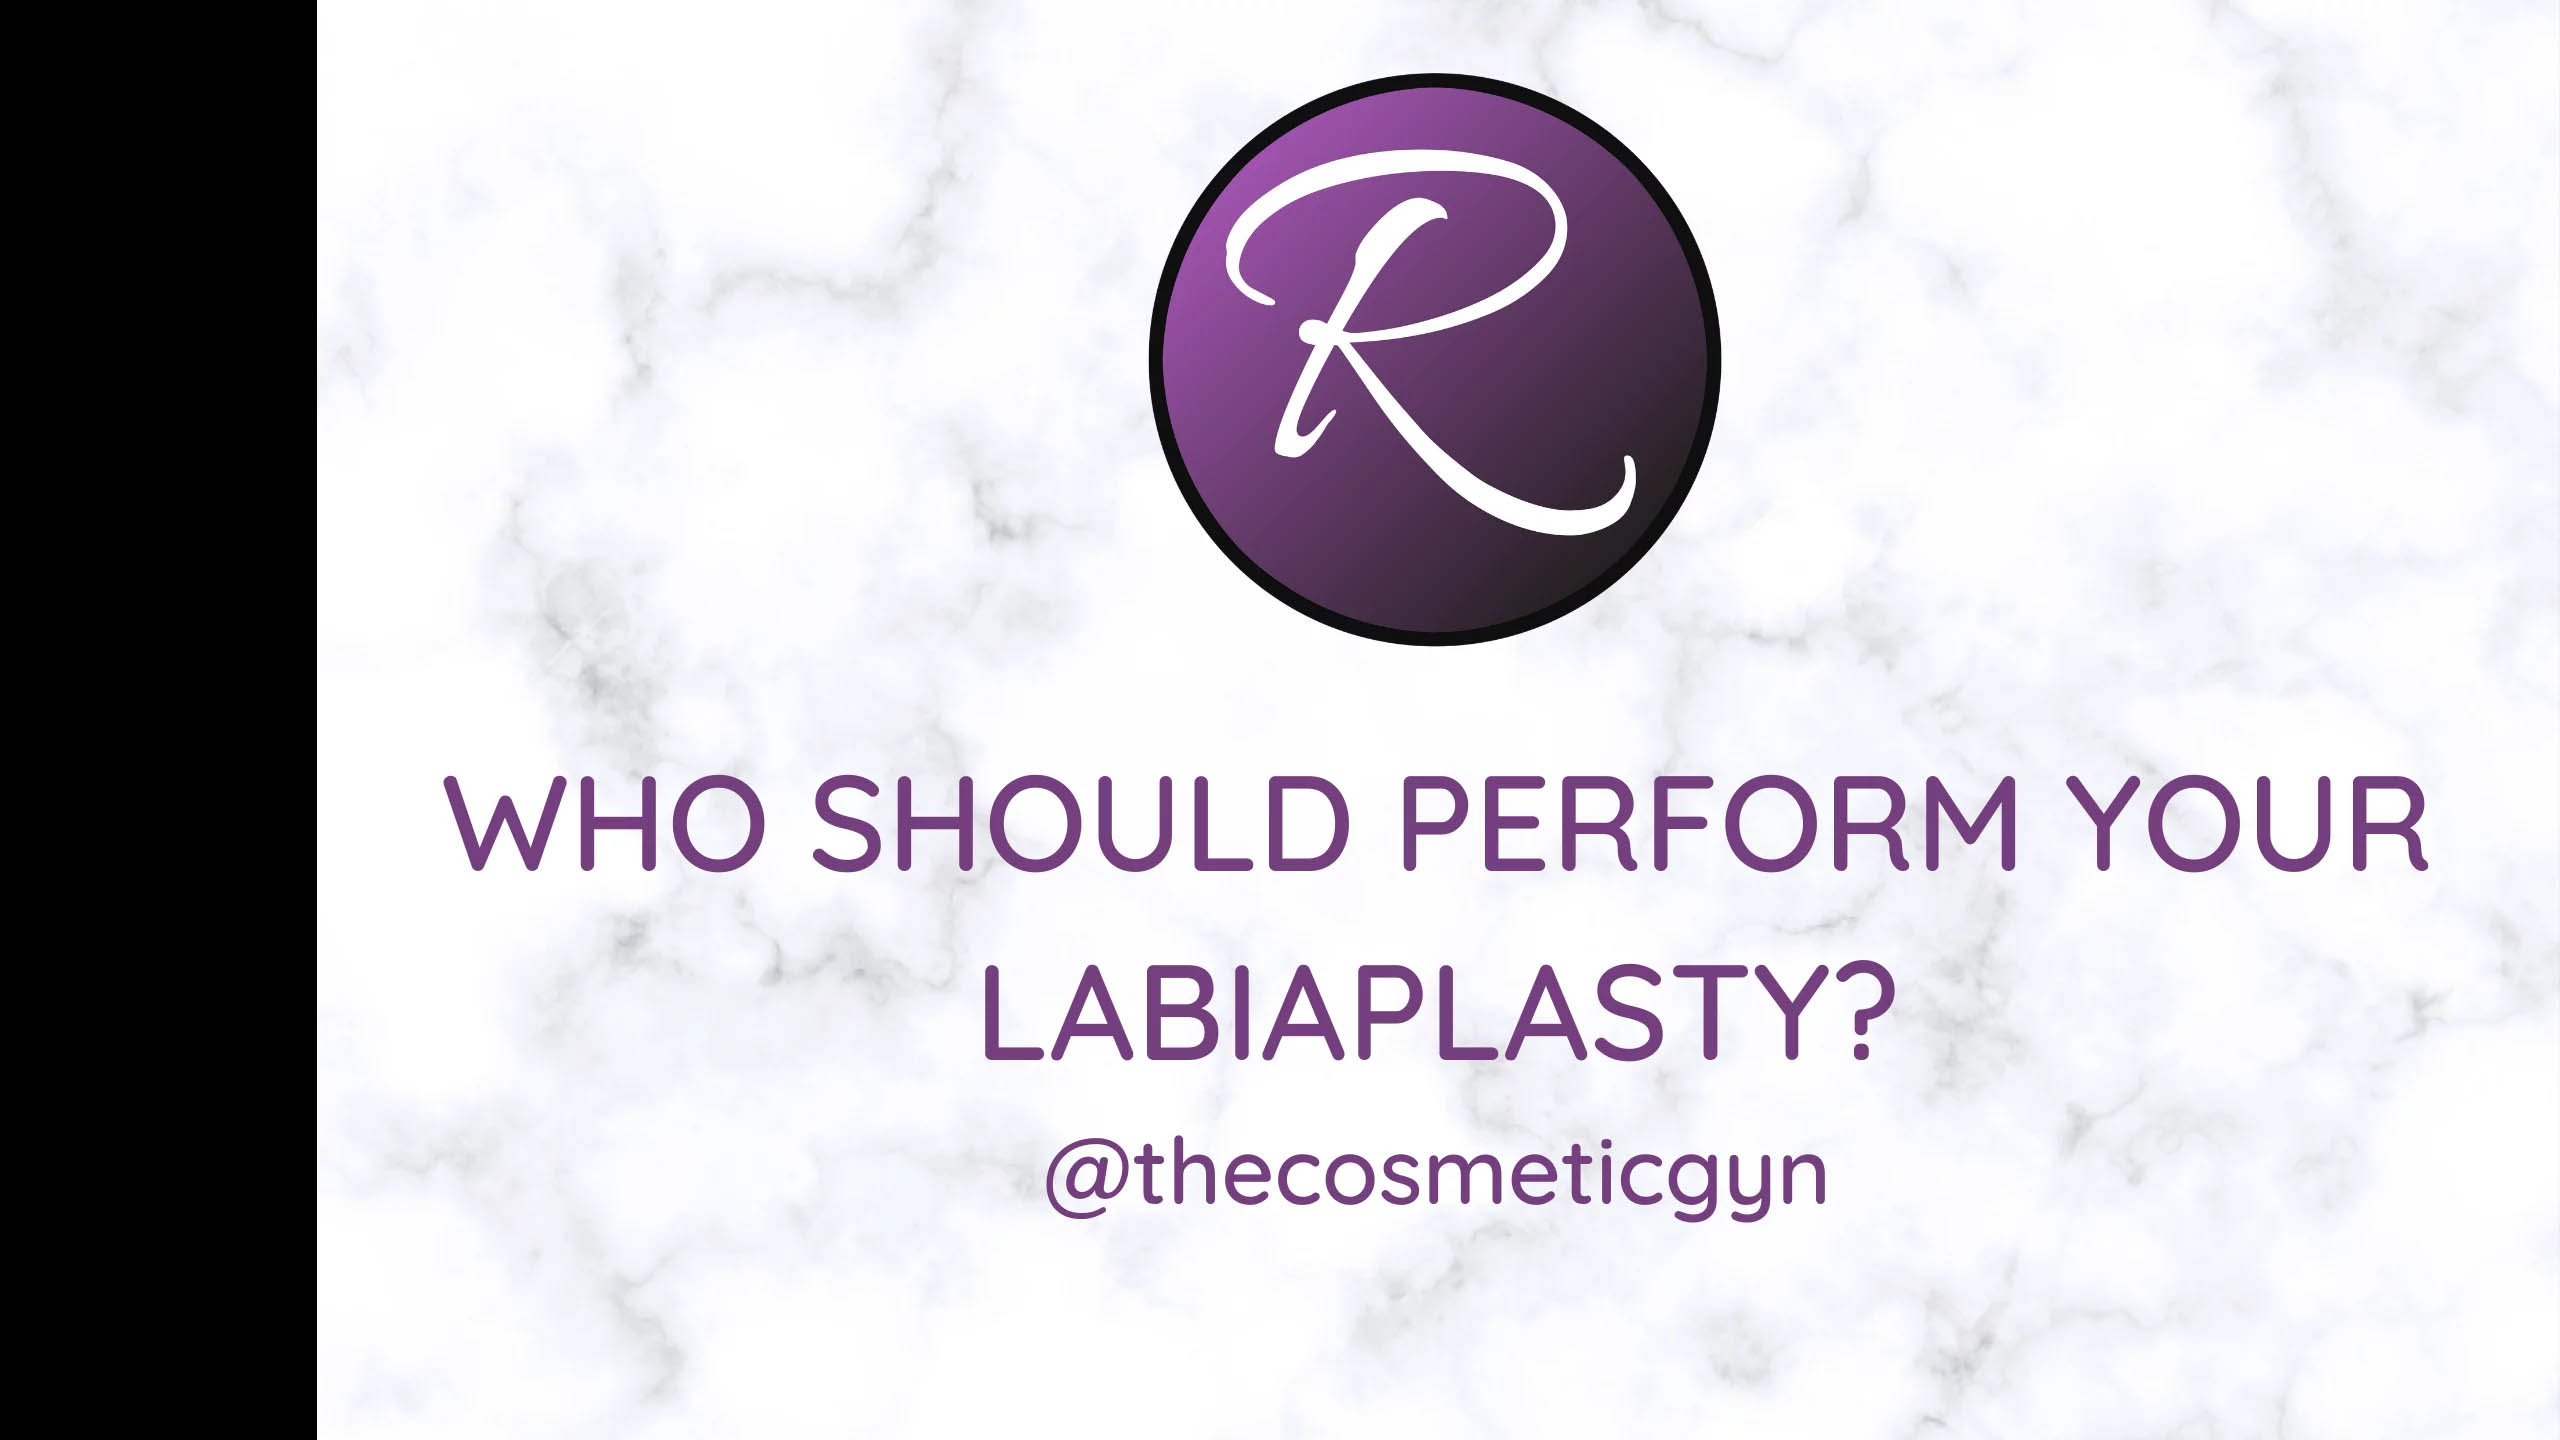 Who Should Perform Your Labiaplasty?